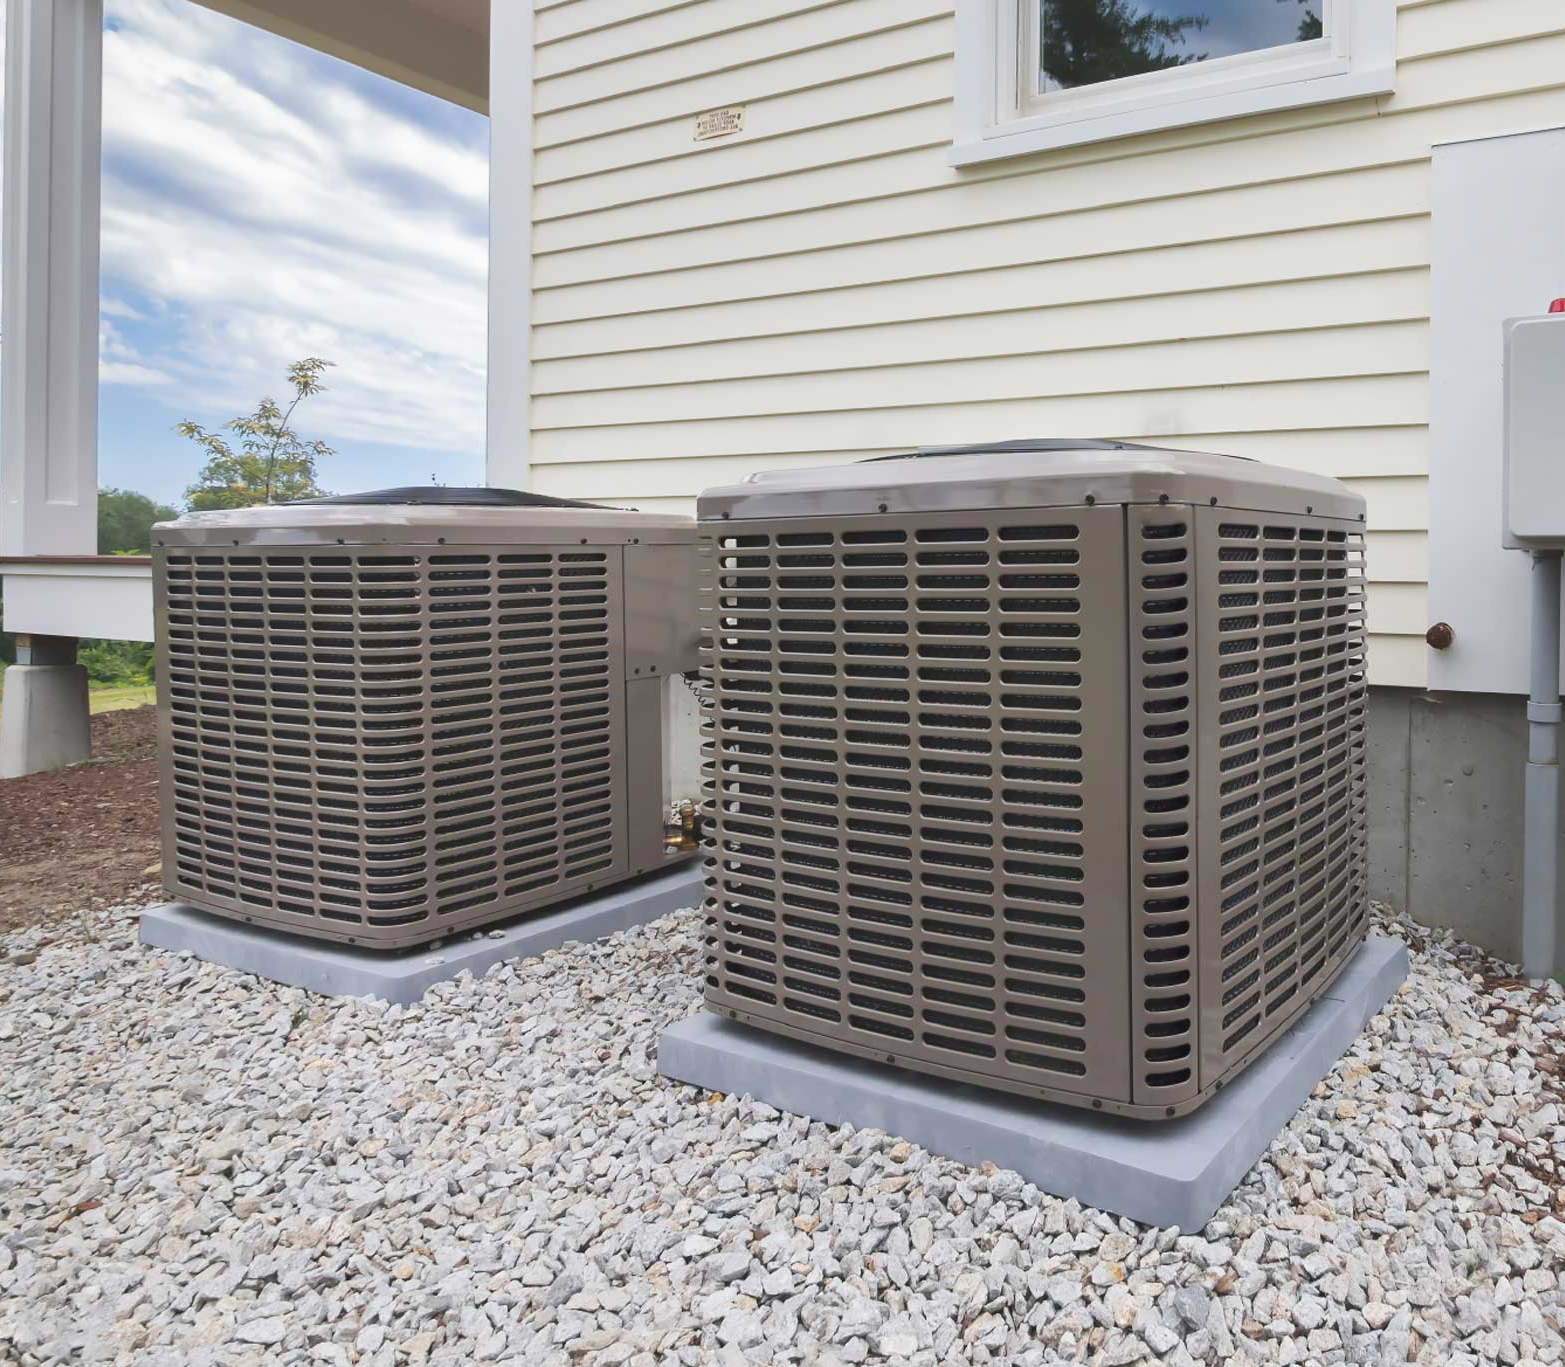 Residential Air Conditioning Units in Pasadena, TX